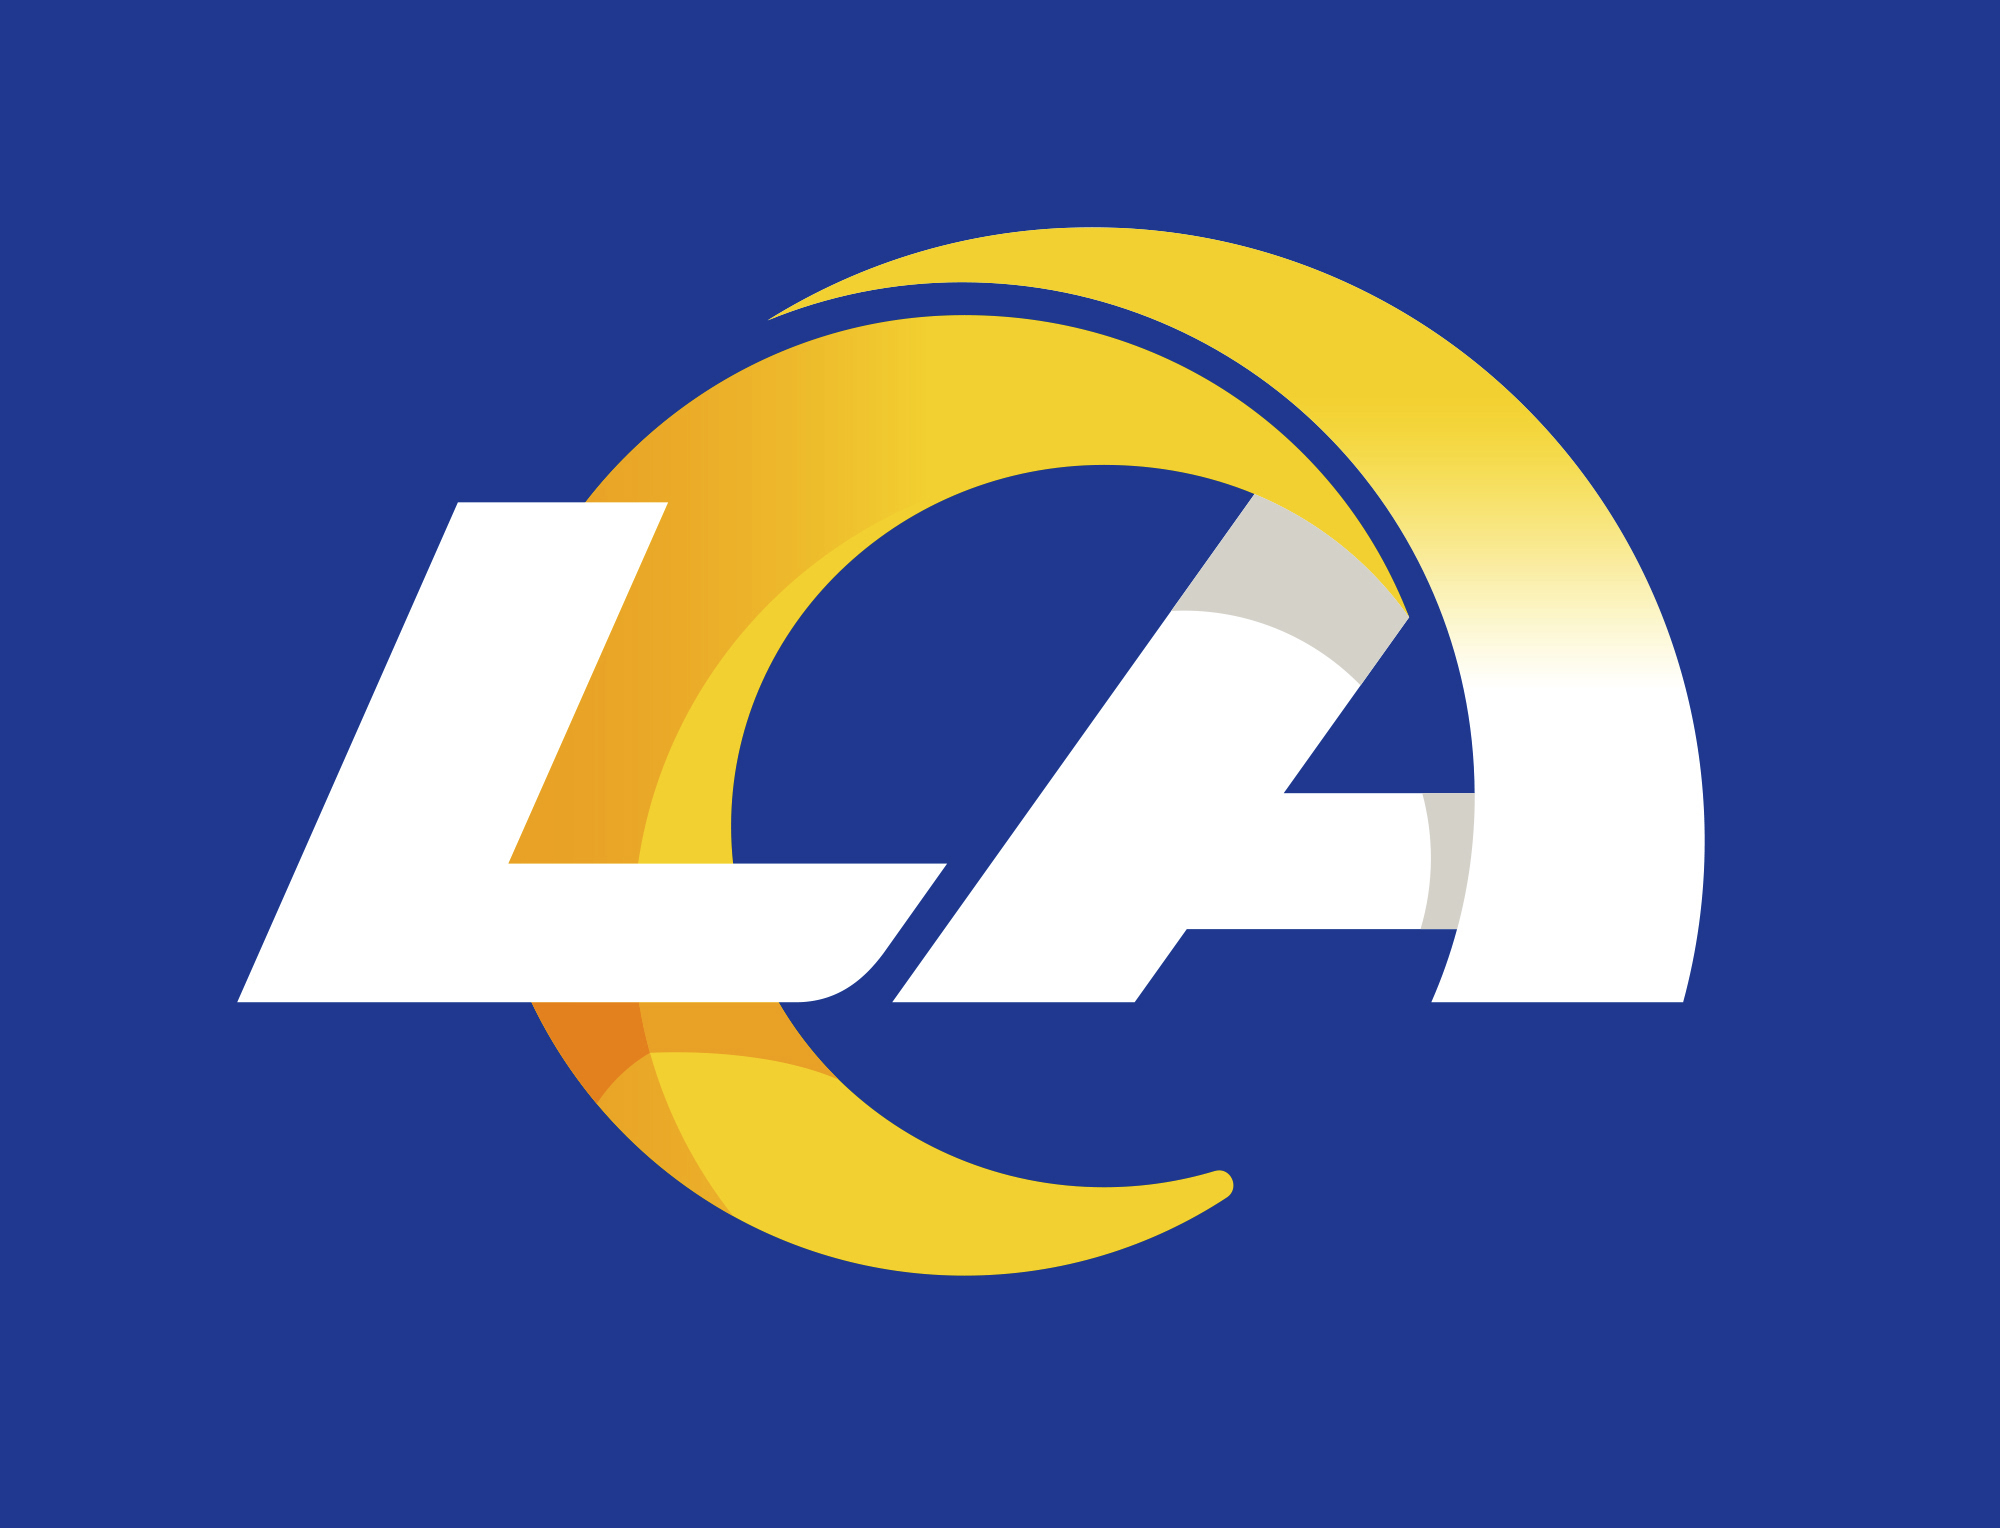 With new logo, Los Angeles Rams return to their old colors